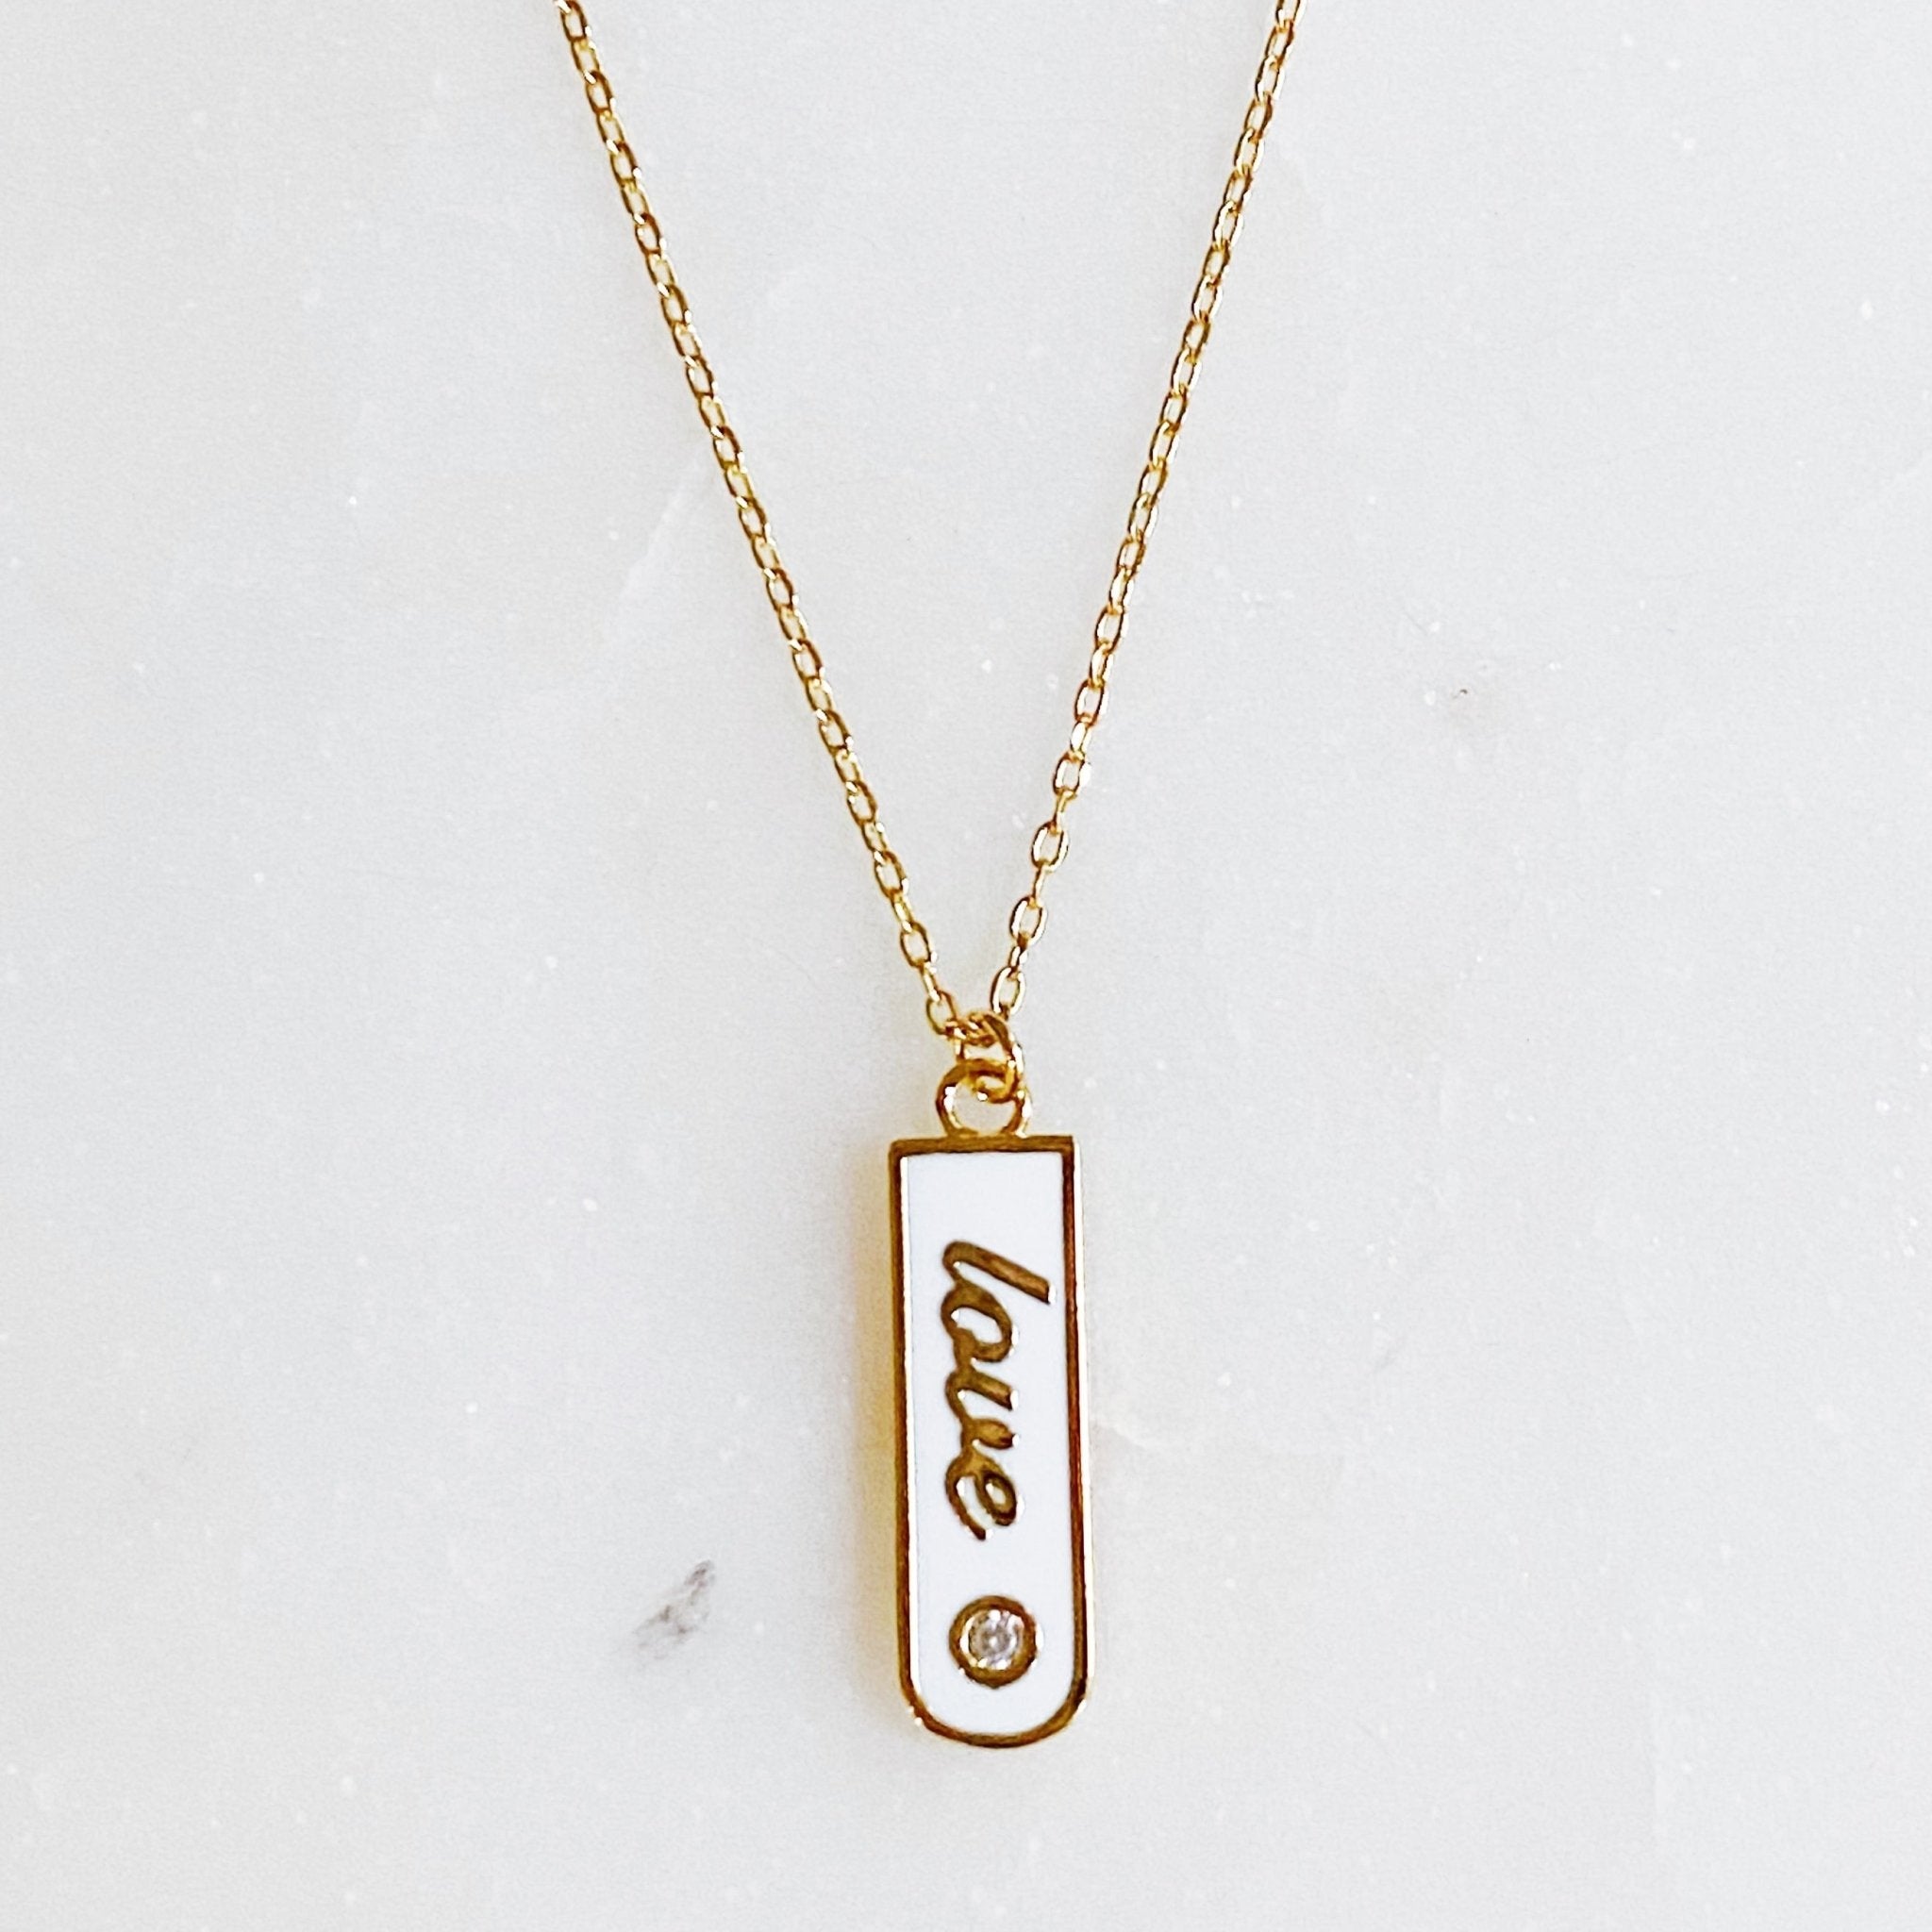 Love Drop Bar Necklace - The Kindness Cause